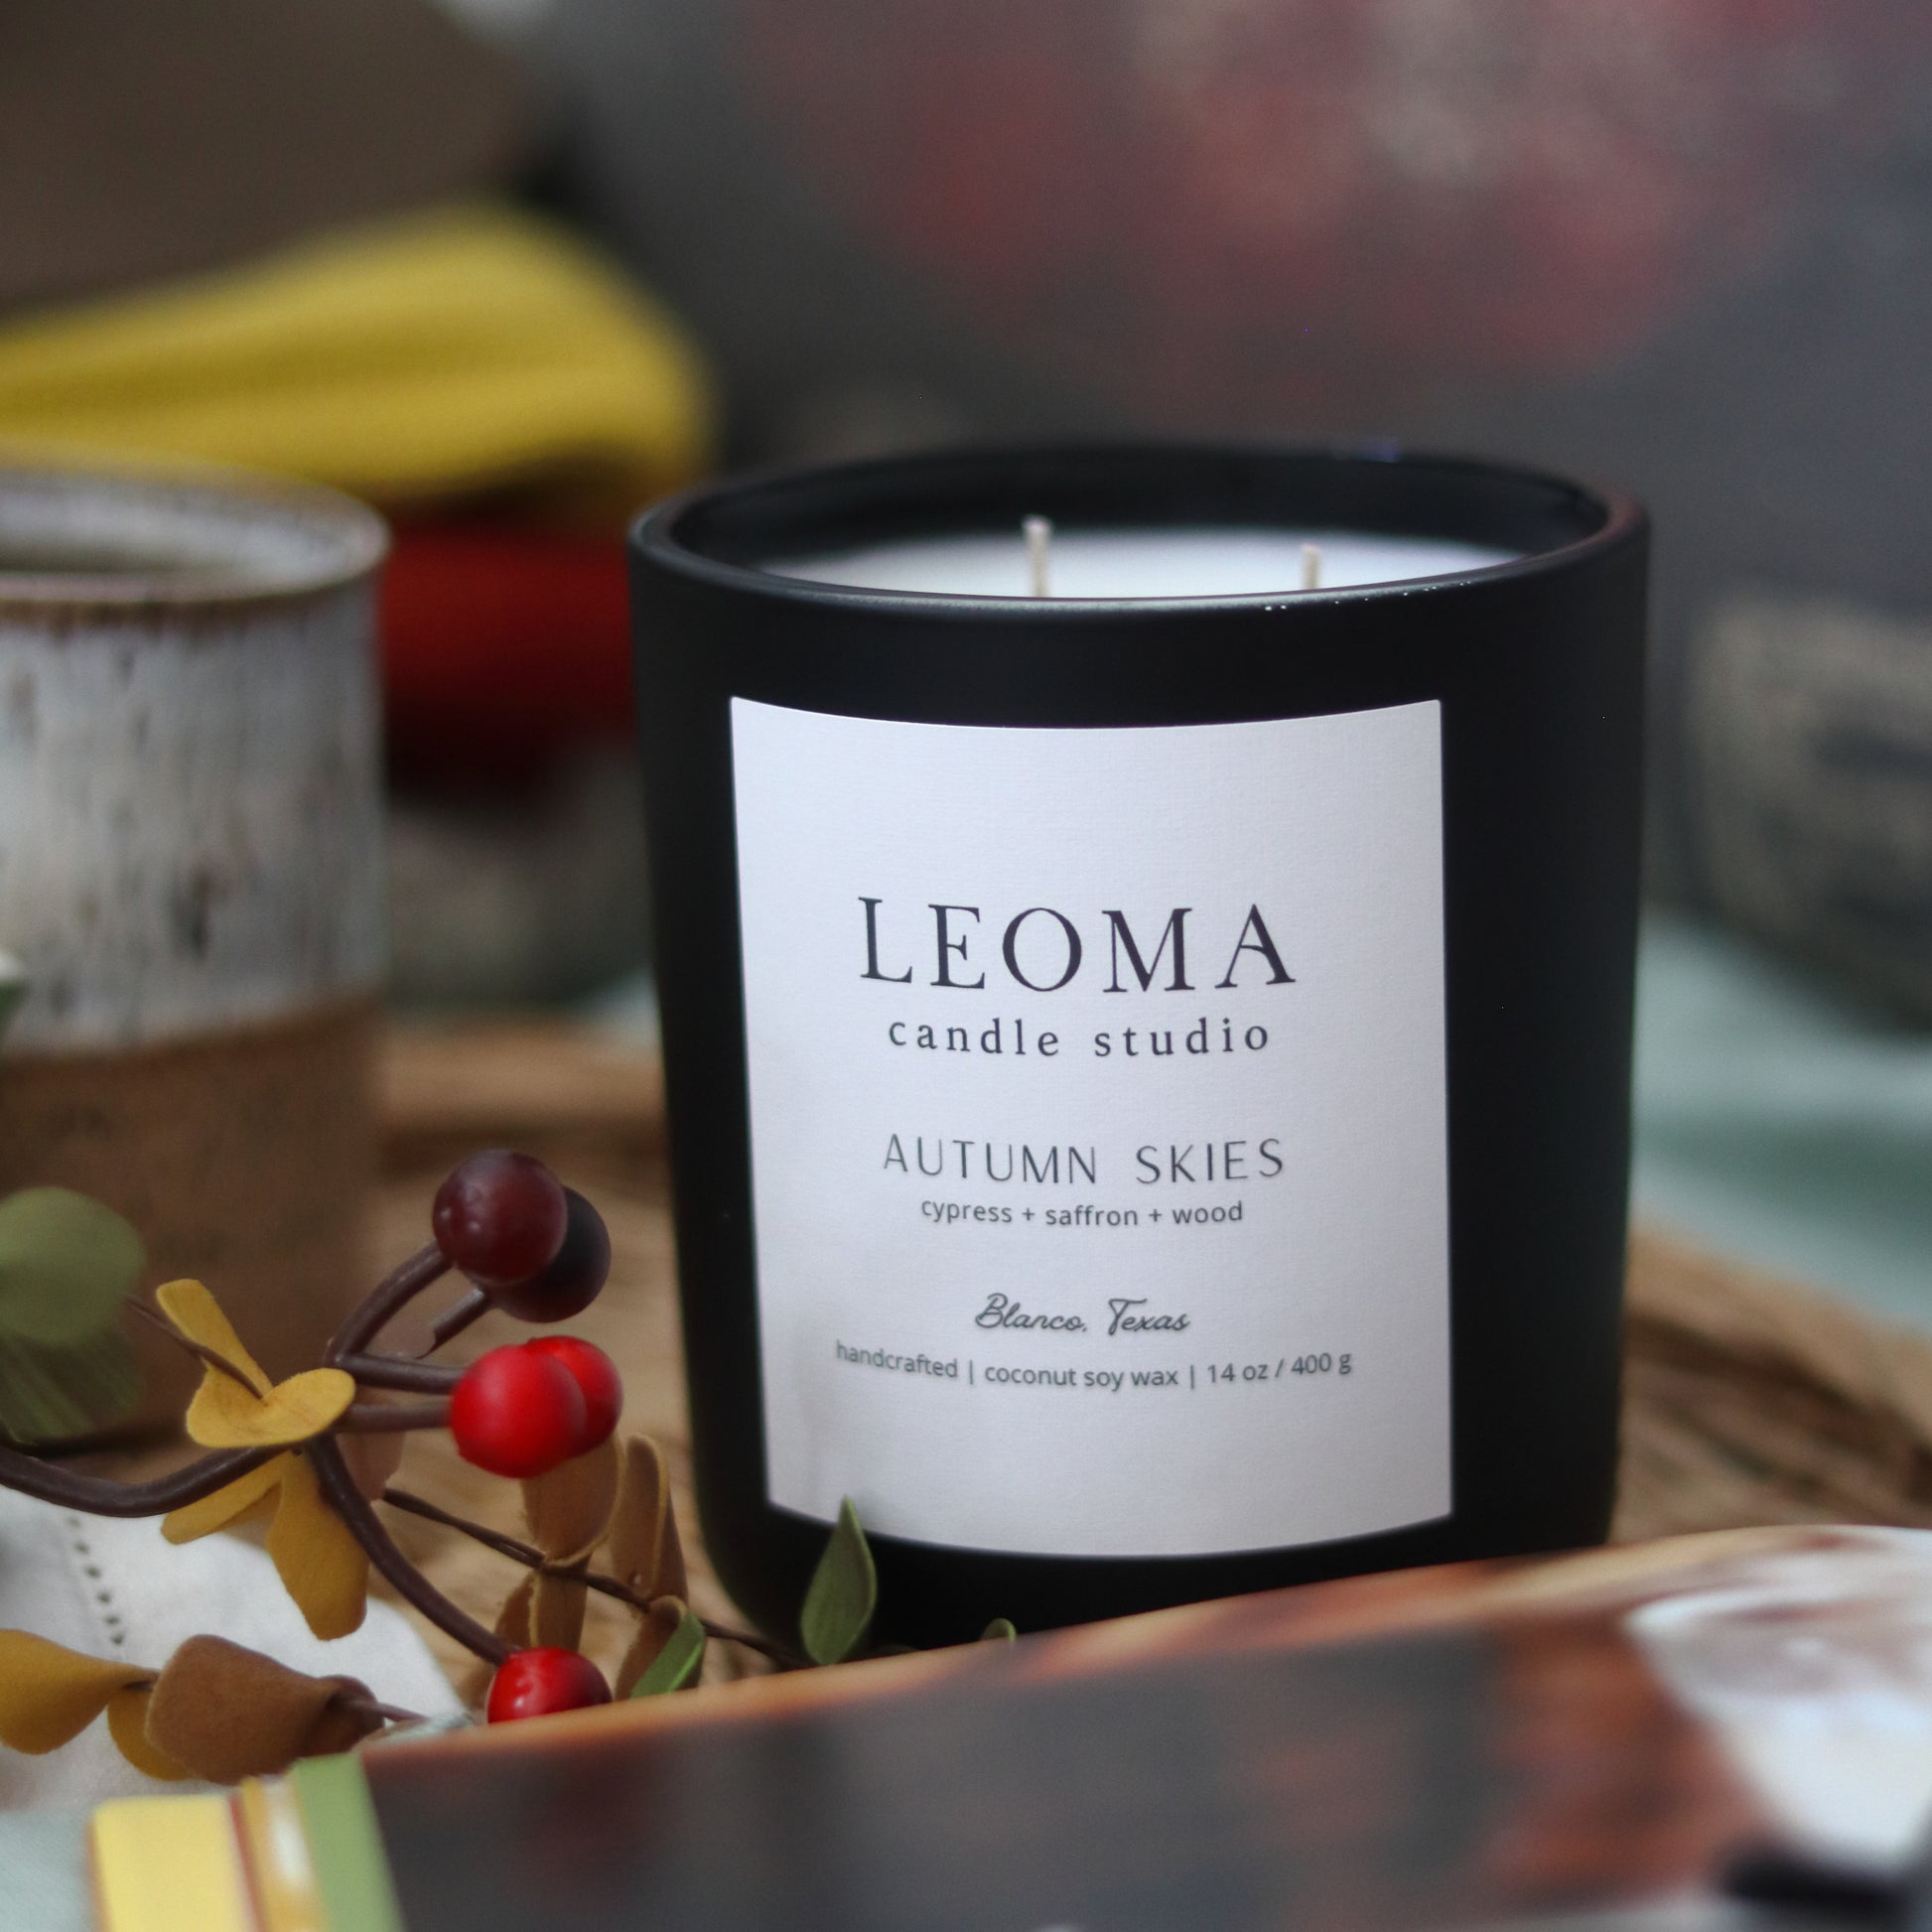 Scented natural soy candle. non toxic. Autumn Skies fall scent. Black vessel. close.